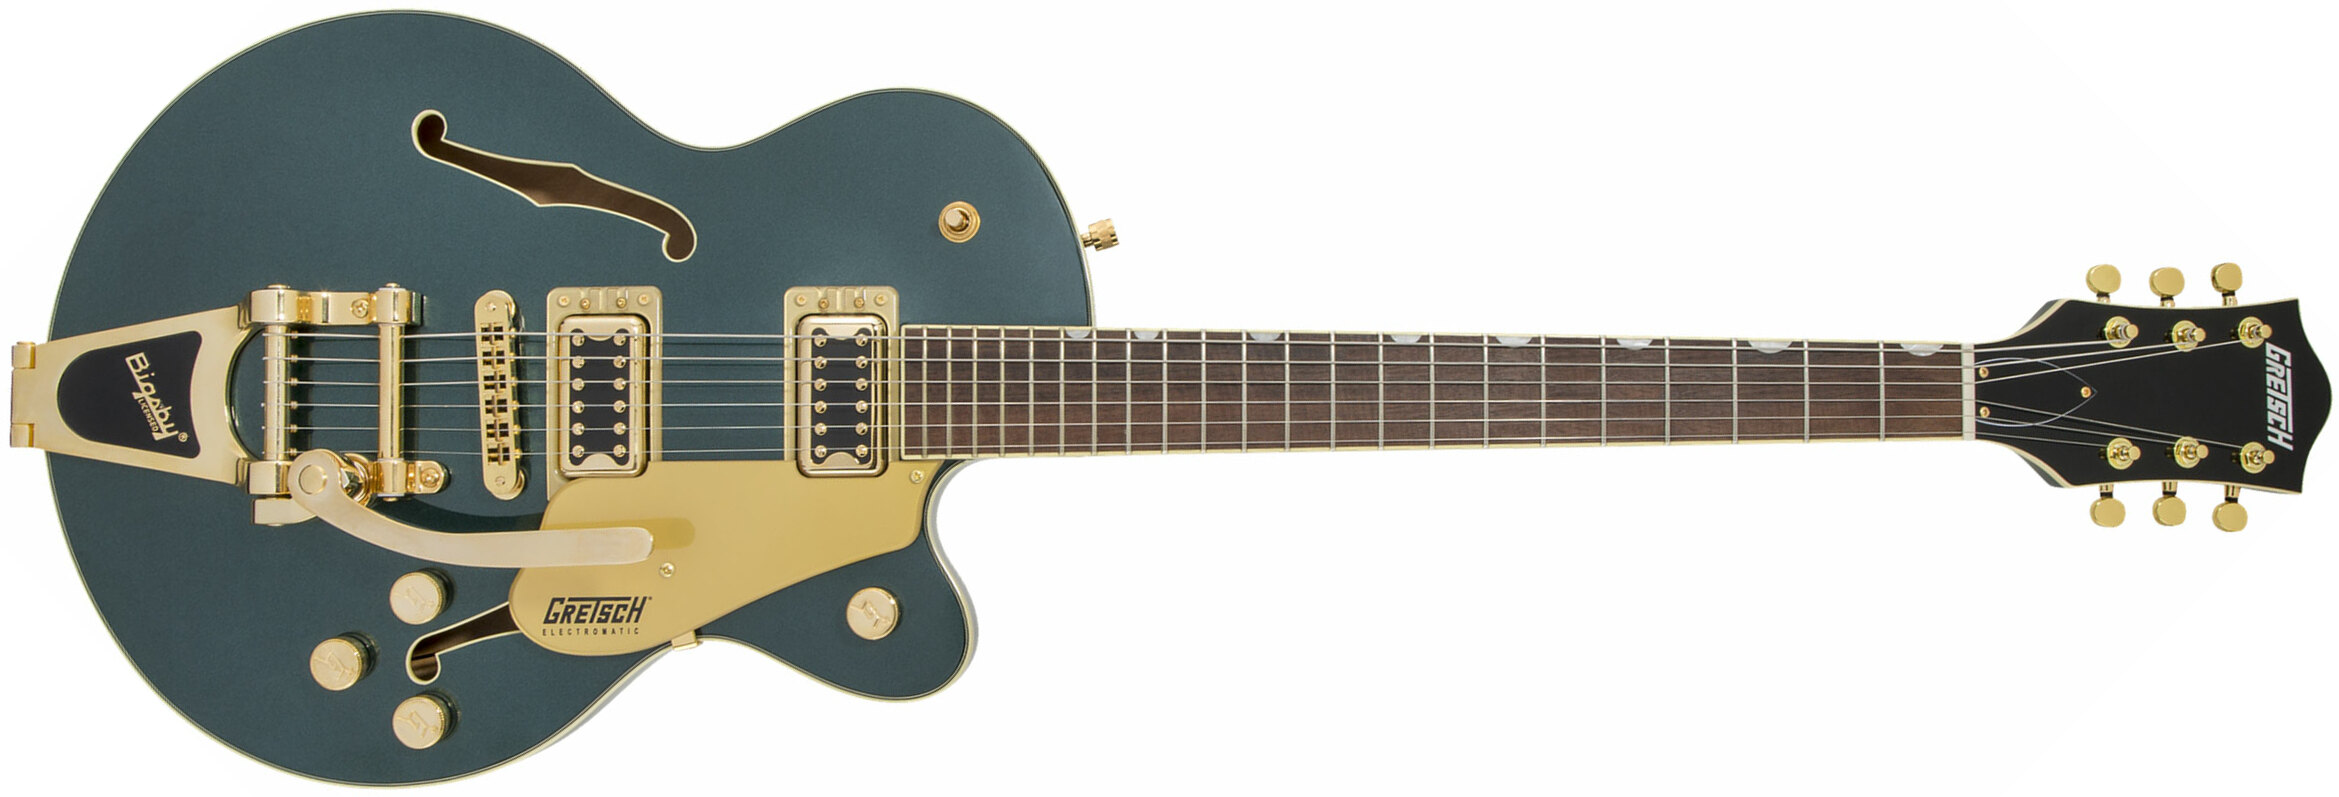 Gretsch G5655tg Electromatic Center Block Jr. Hh Bigsby Lau - Cadillac Green - Semi-hollow electric guitar - Main picture